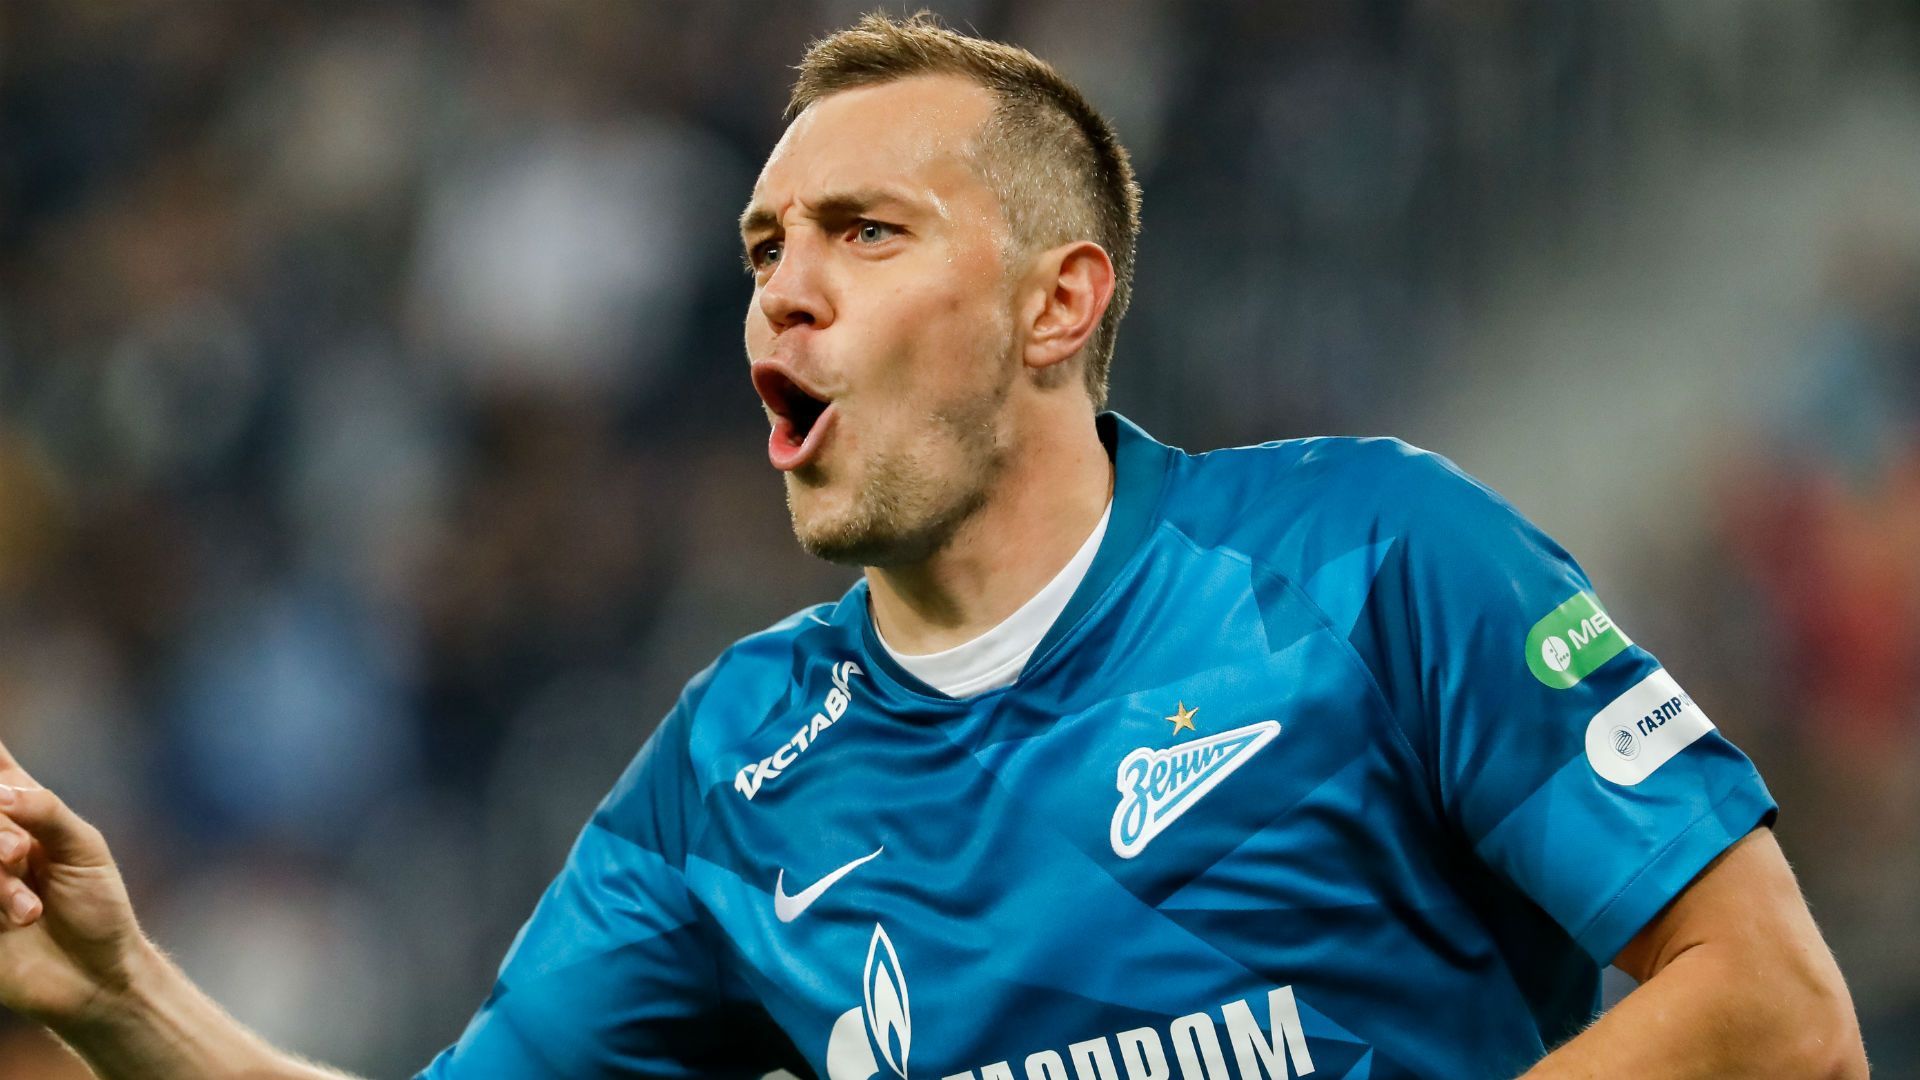 Russia 4 0 Scotland: Dzyuba At The Double In Moscow Mauling